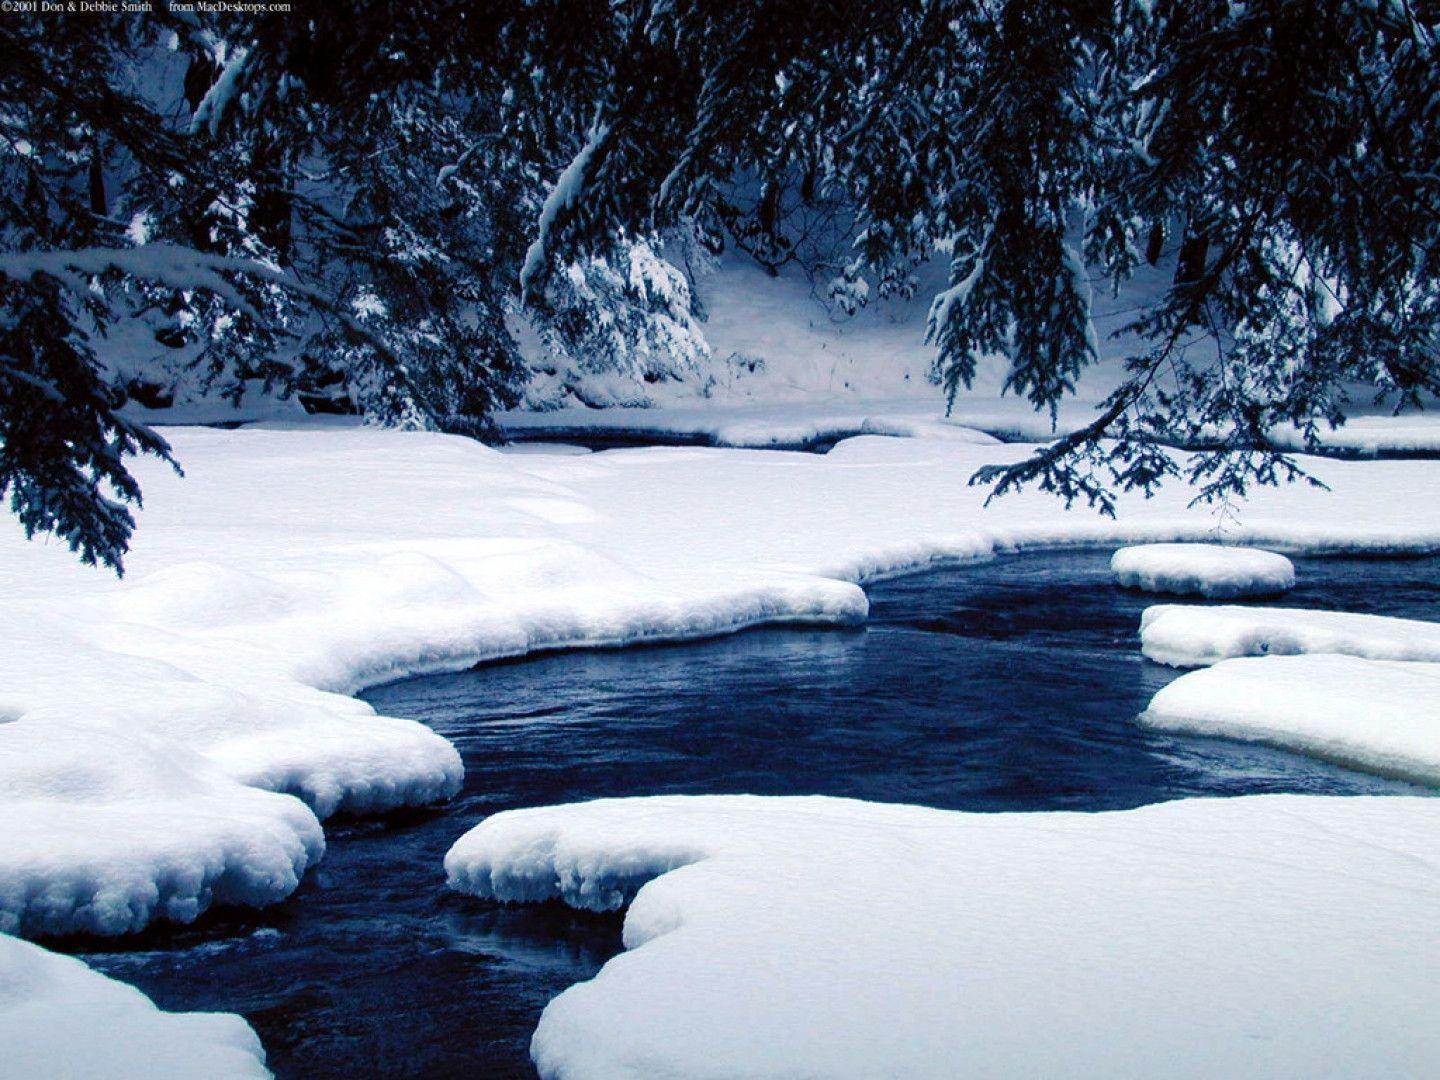 Winter Nature Scenes Wallpapers 10557 Hd Wallpapers in Nature